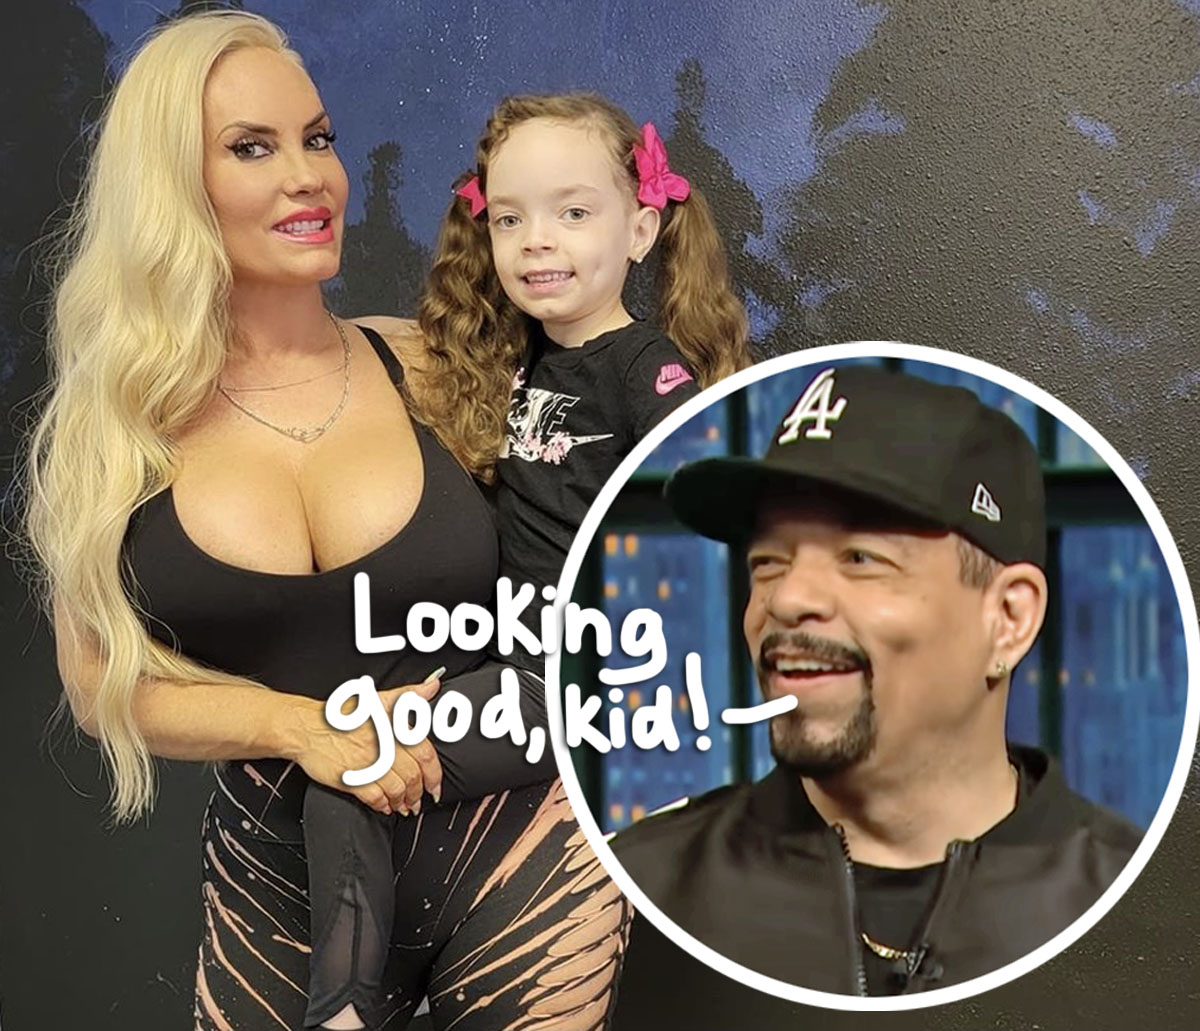 OMG Ice-T's Daughter Looks JUST LIKE HIM! See The Proof! - Perez